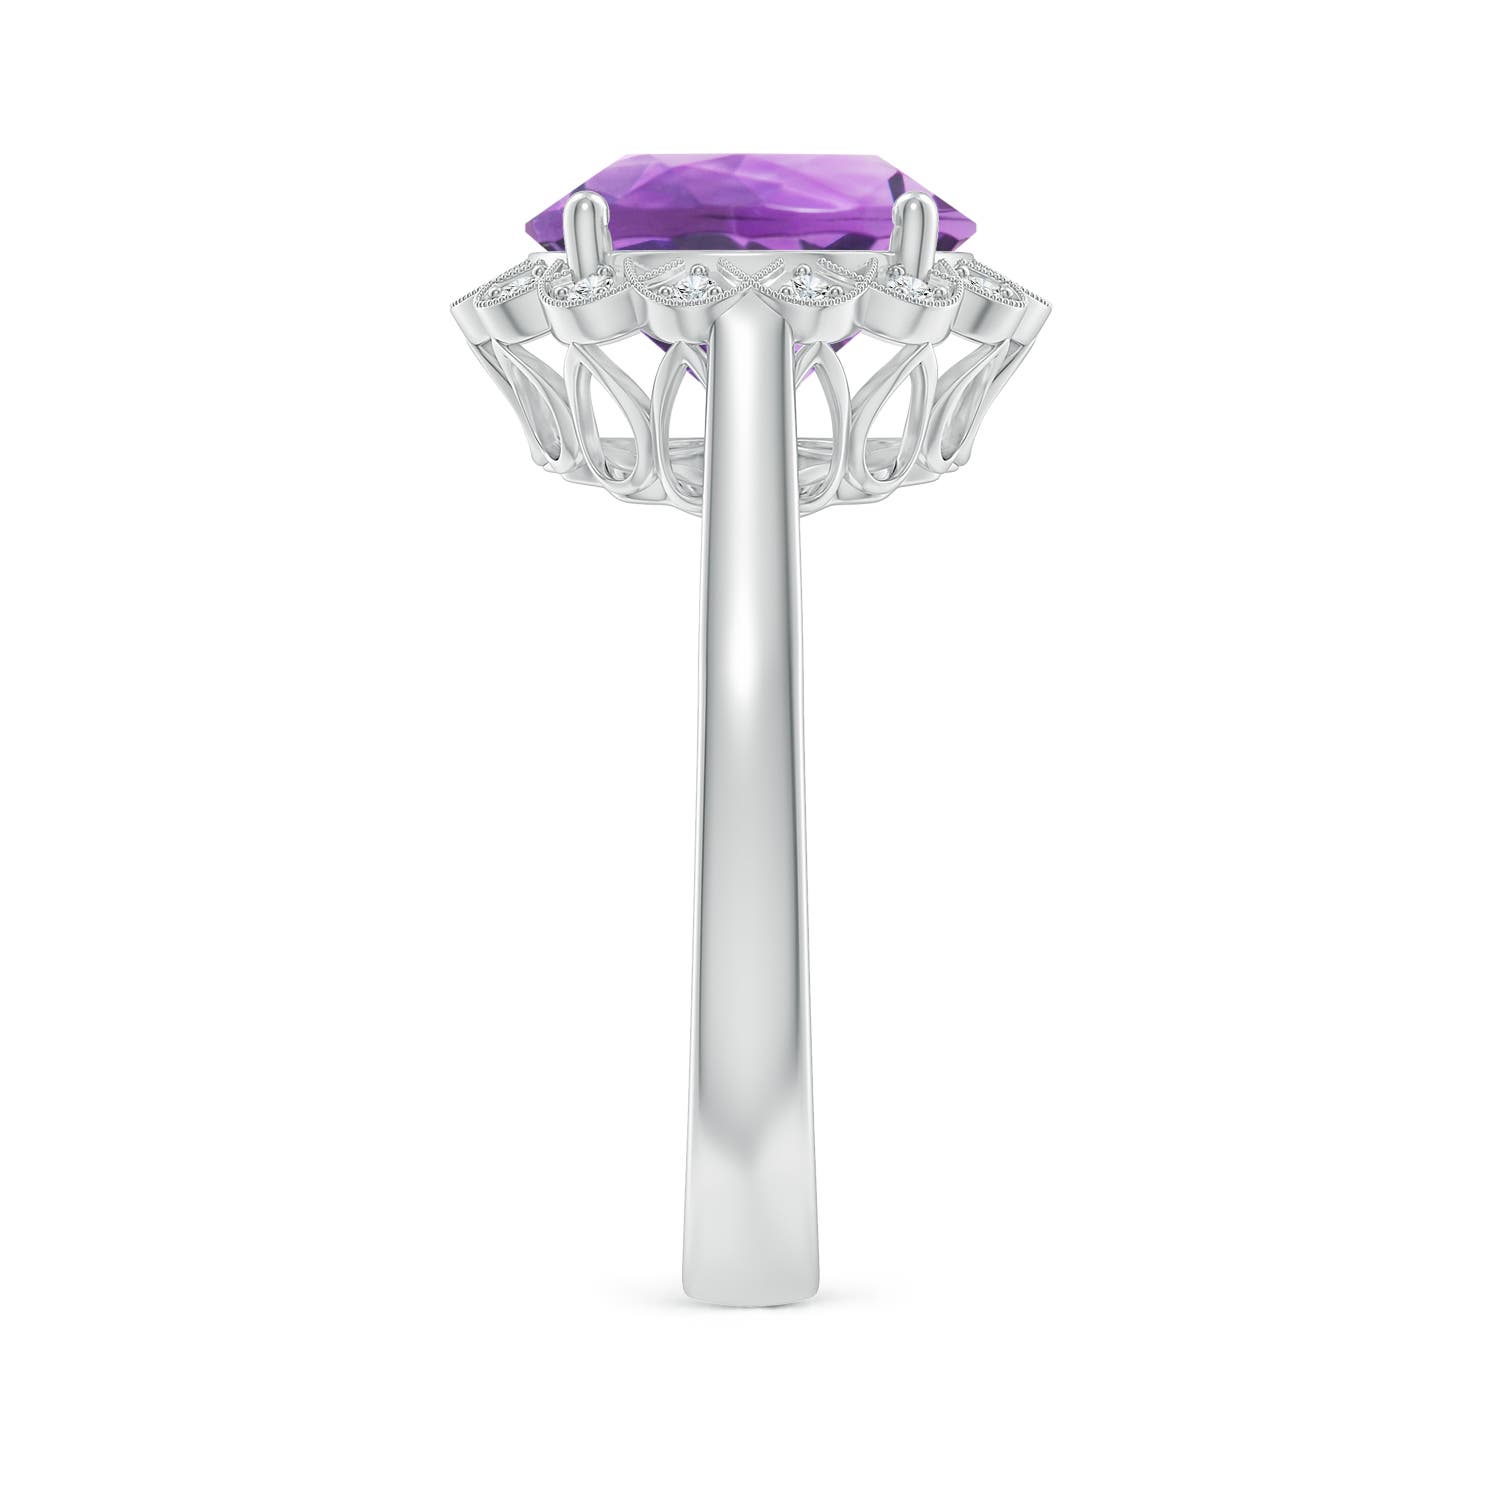 A - Amethyst / 3.28 CT / 14 KT White Gold